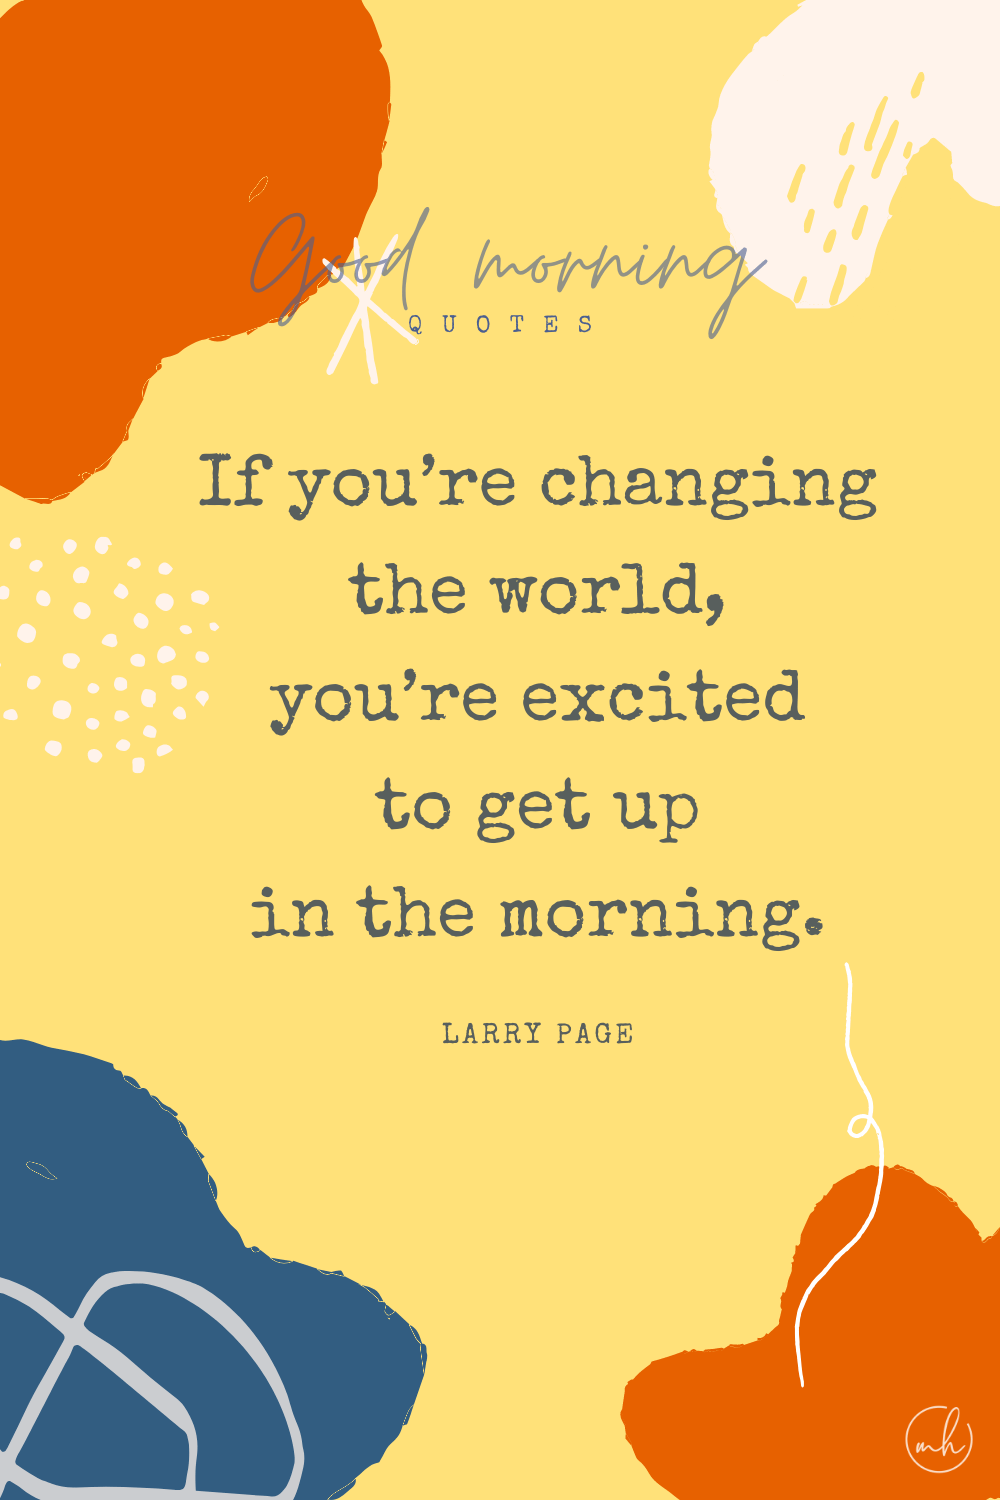 "If you’re changing the world, you’re working on important things. You’re excited to get up in the morning." – Larry Page